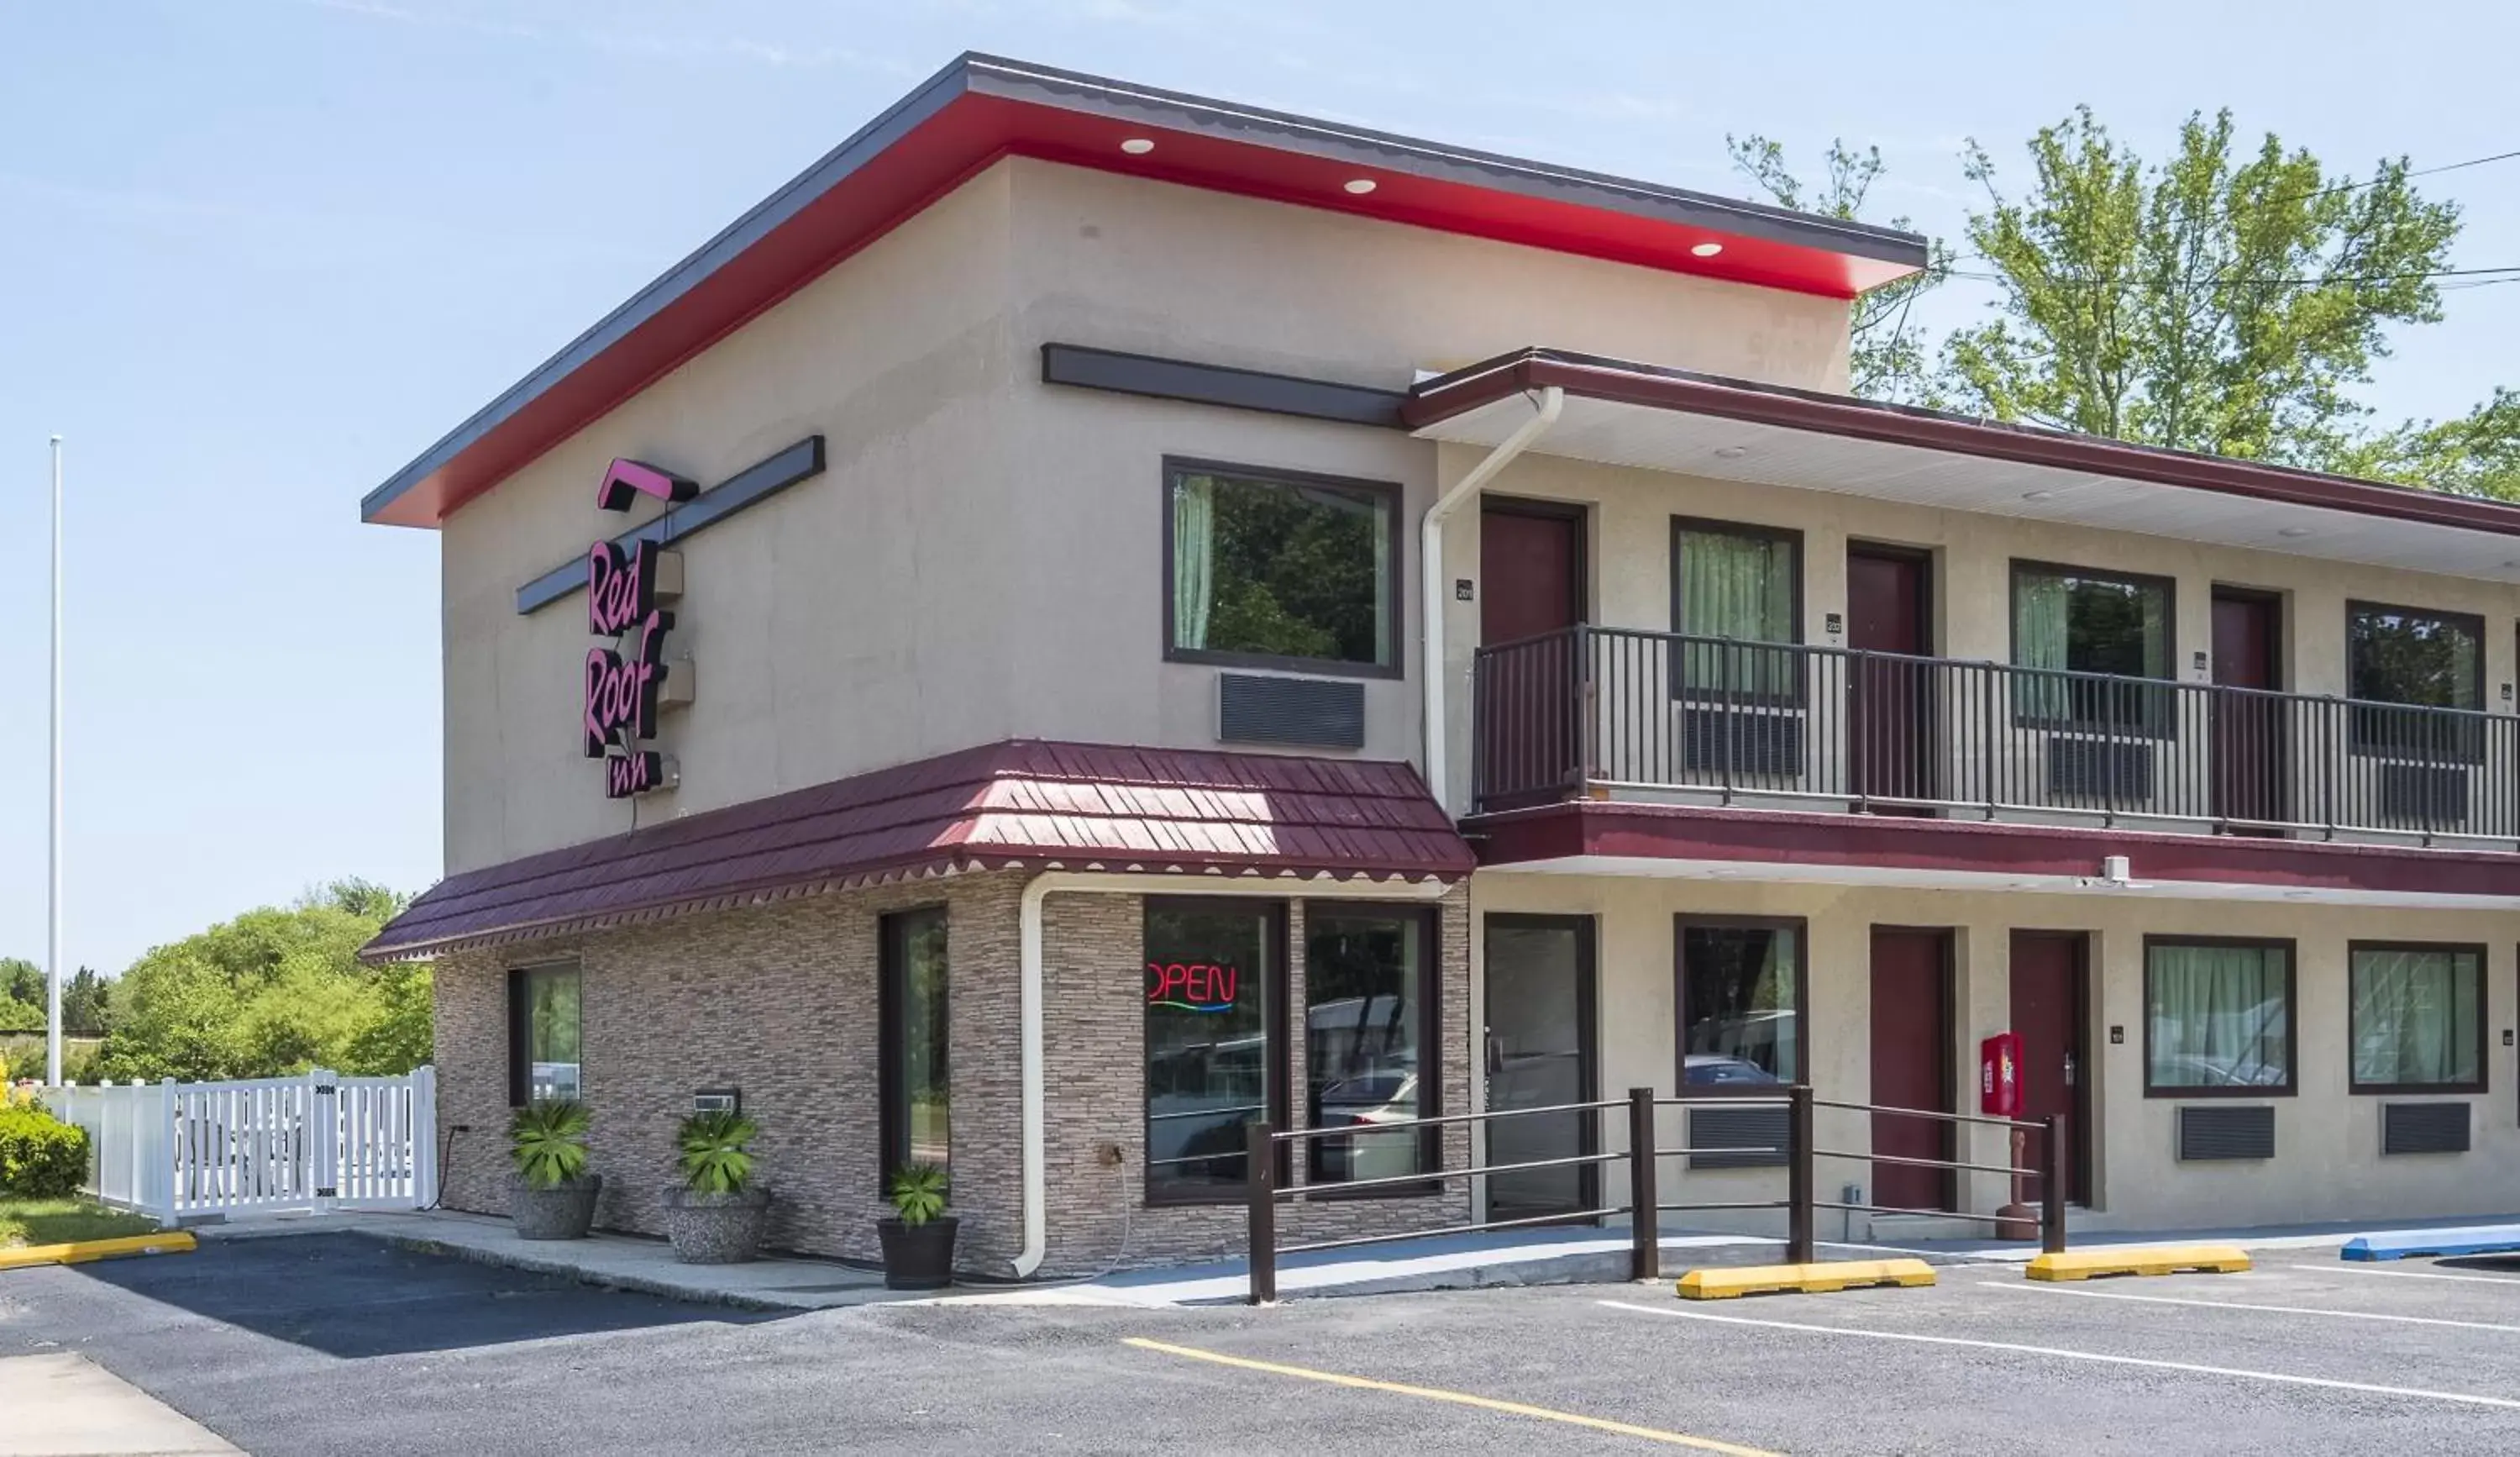 Property Building in Red Roof Inn Wildwood – Cape May/Rio Grande